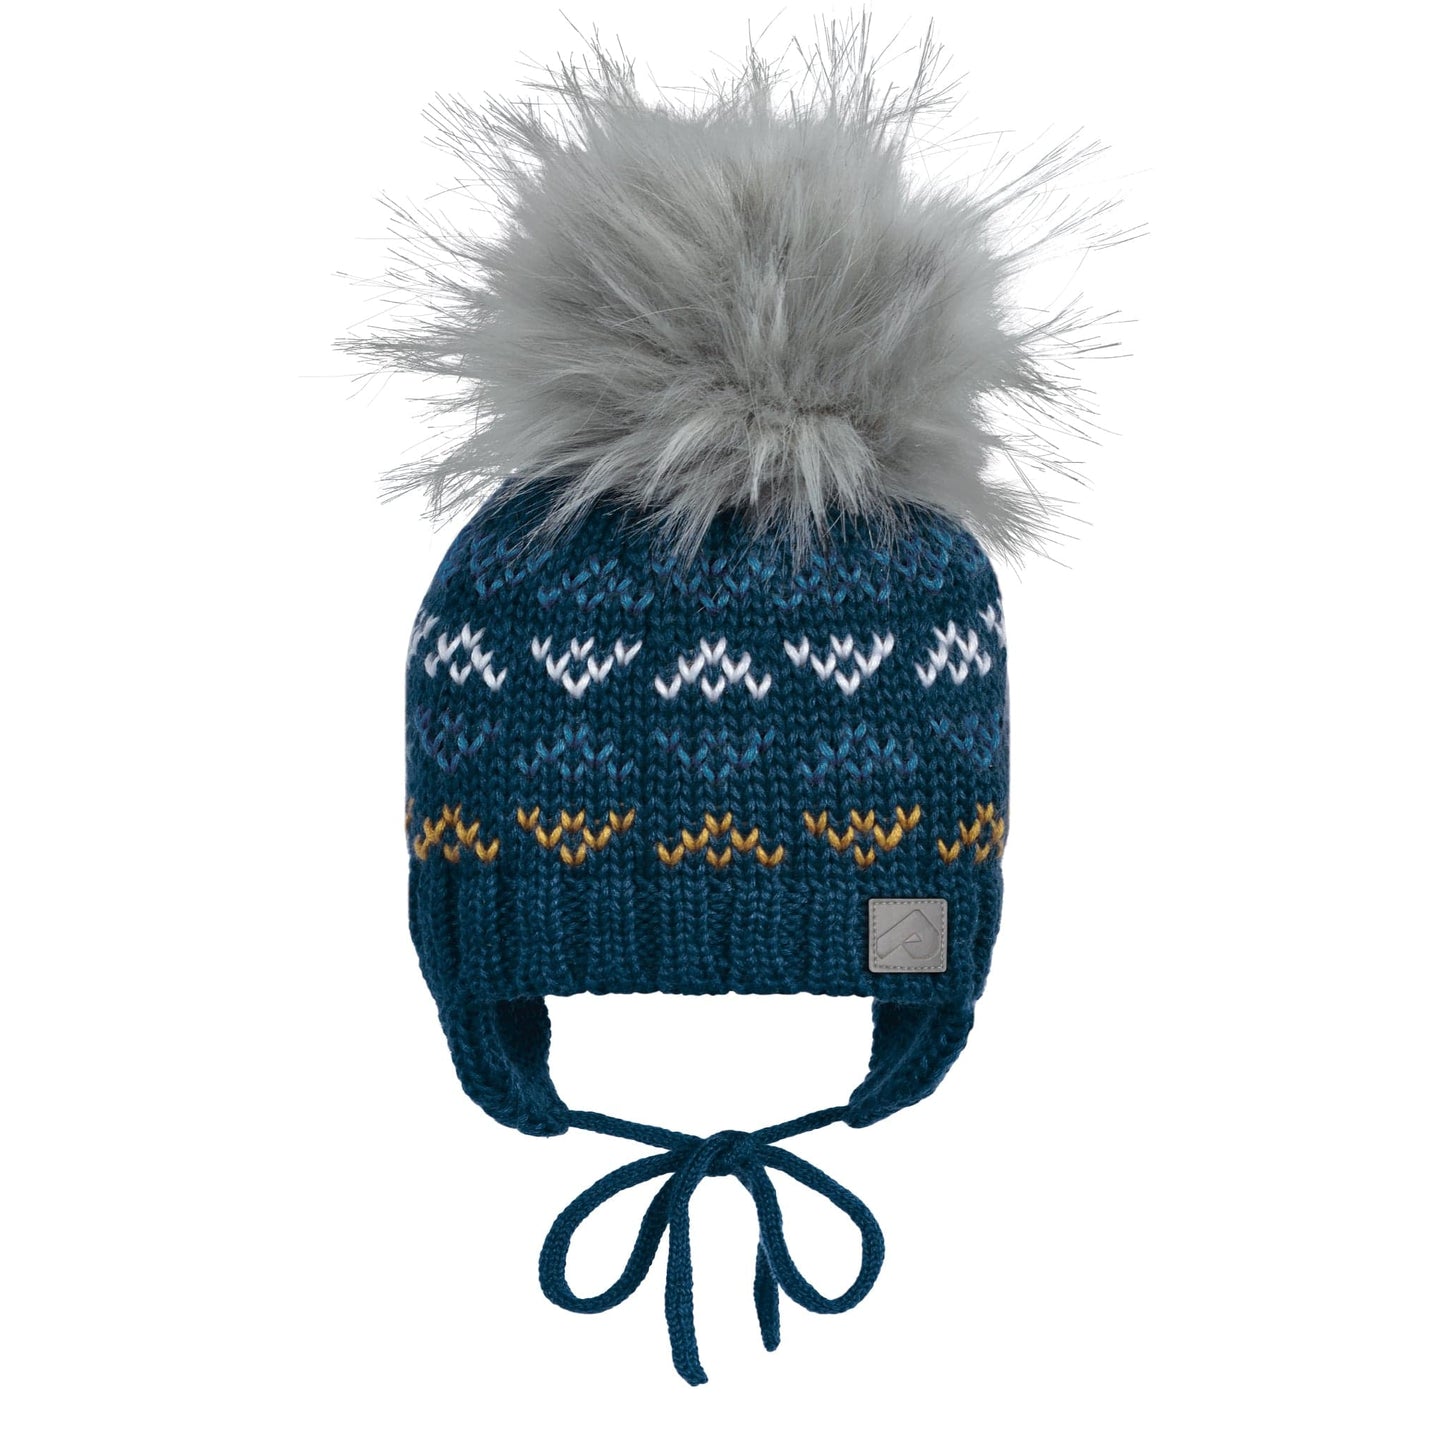 Winter hat with strings and removable pompom - Rorqual